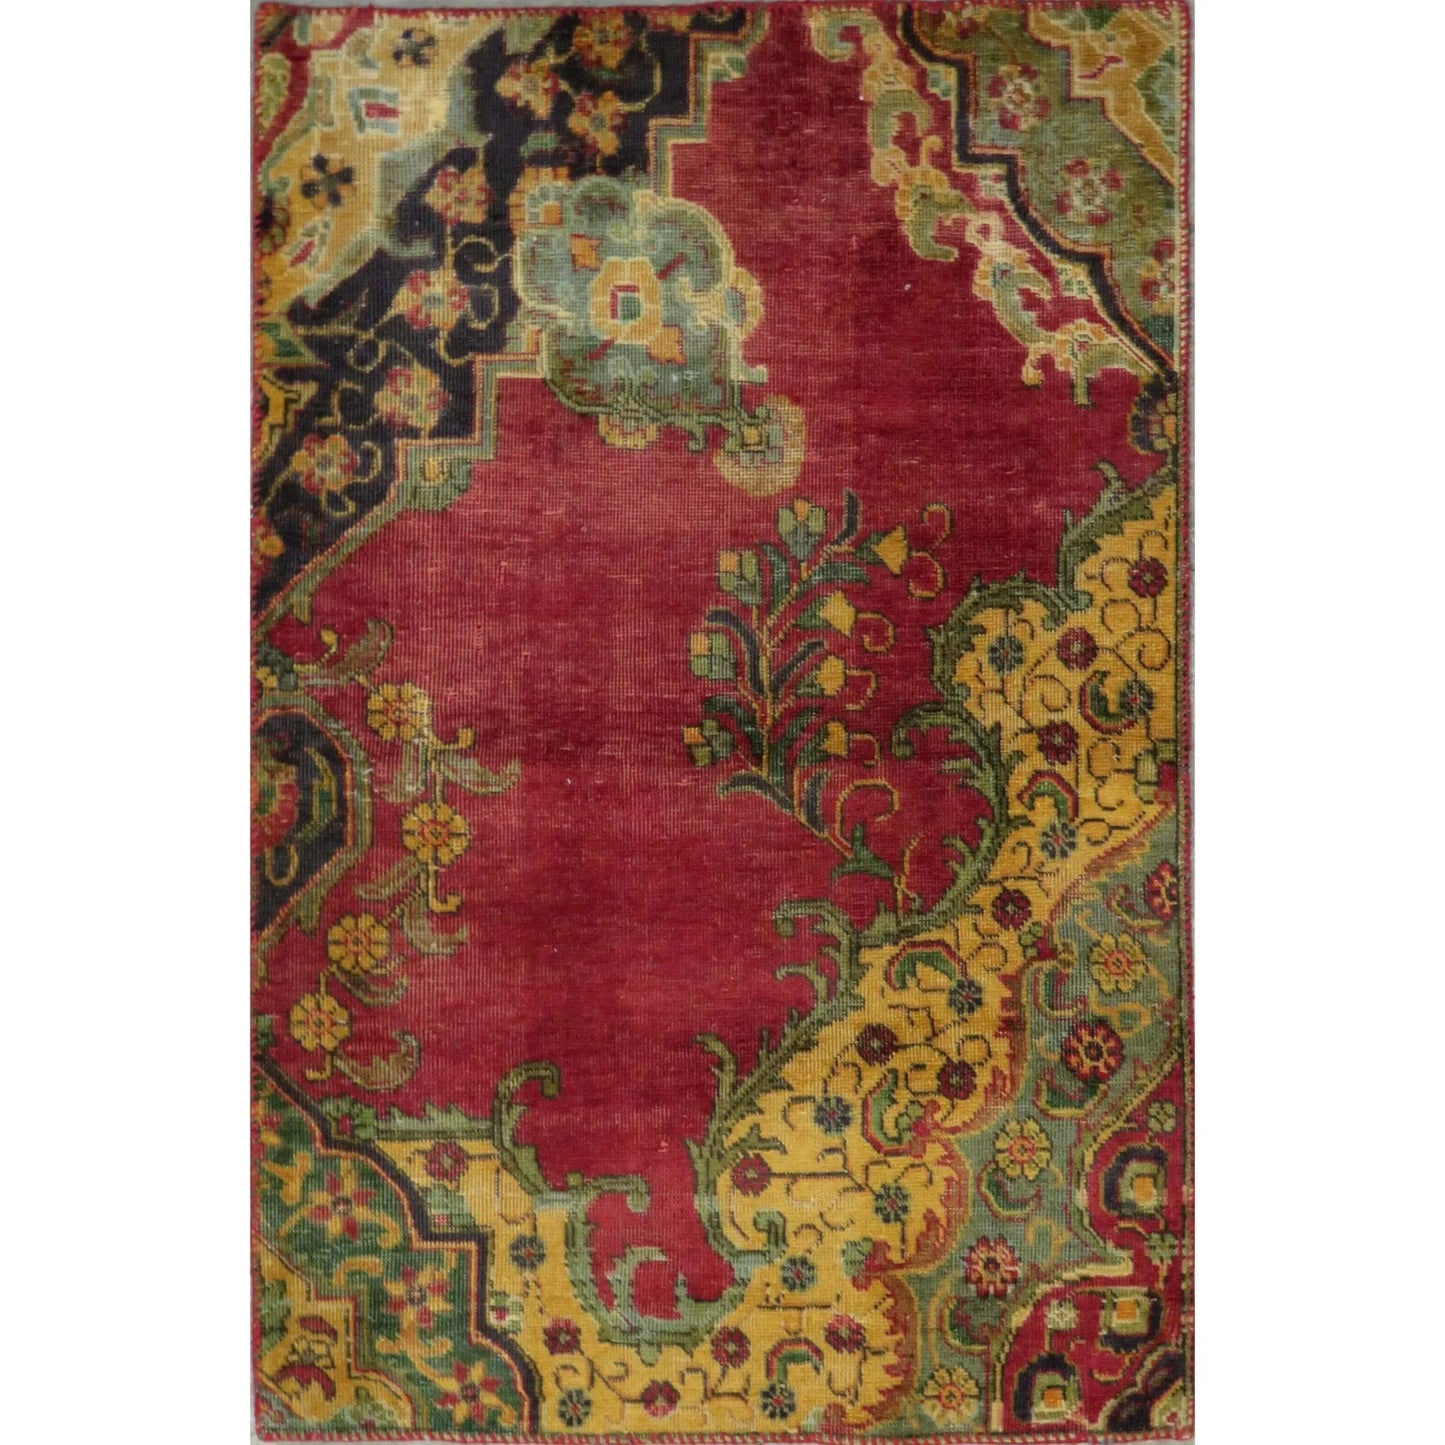 Hand-Knotted Persian Wool Rug _ Luxurious Vintage Design, 4'0" x 3'0", Artisan Crafted